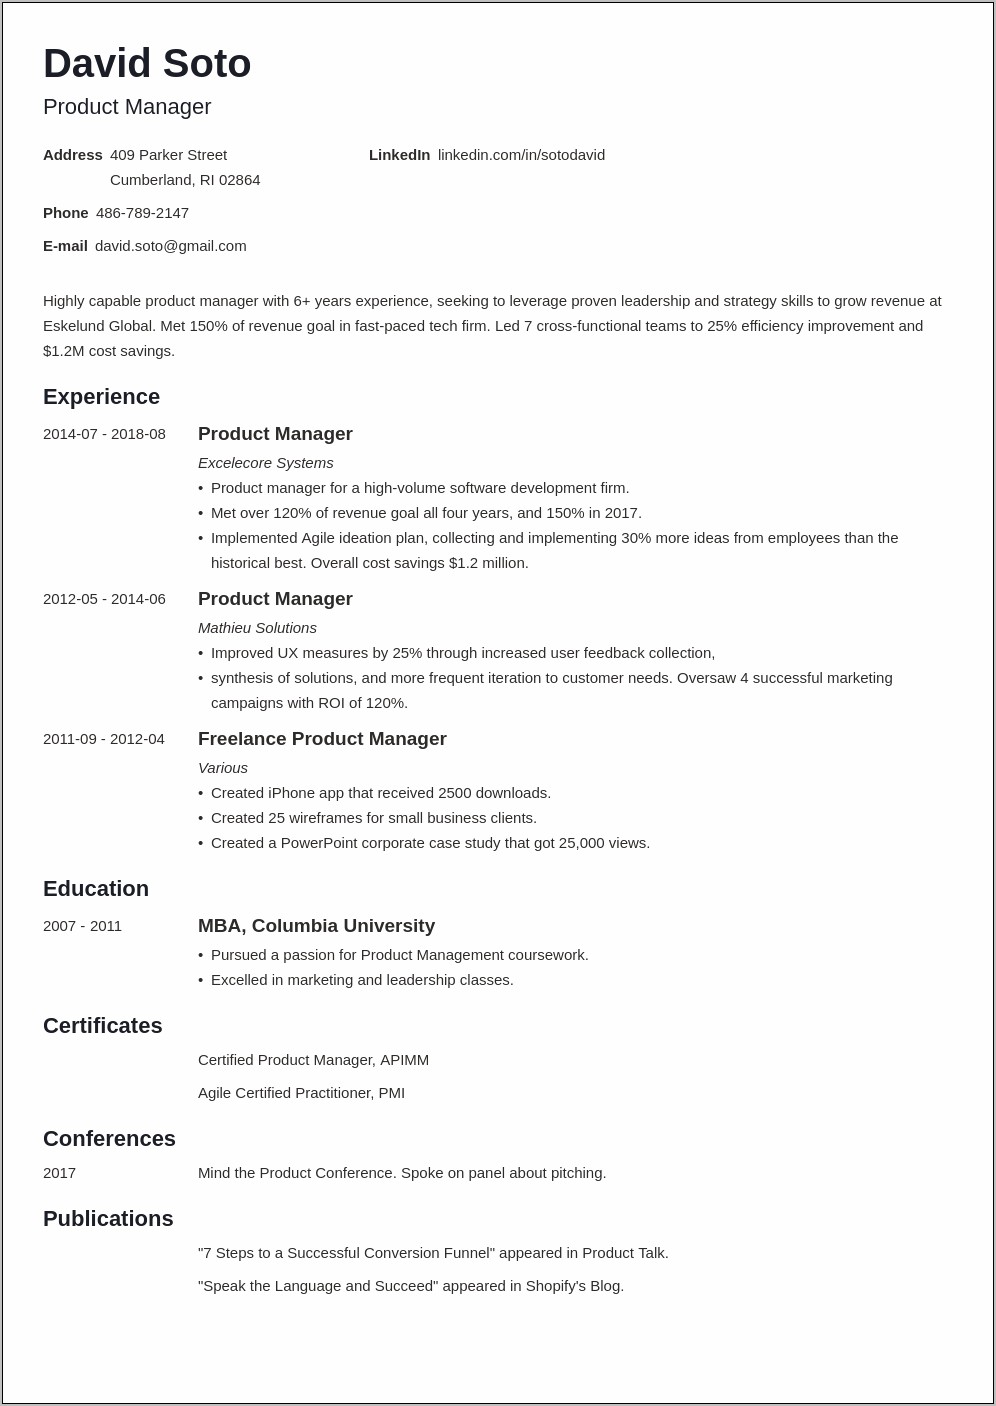 Food Production Manager Resume Sample